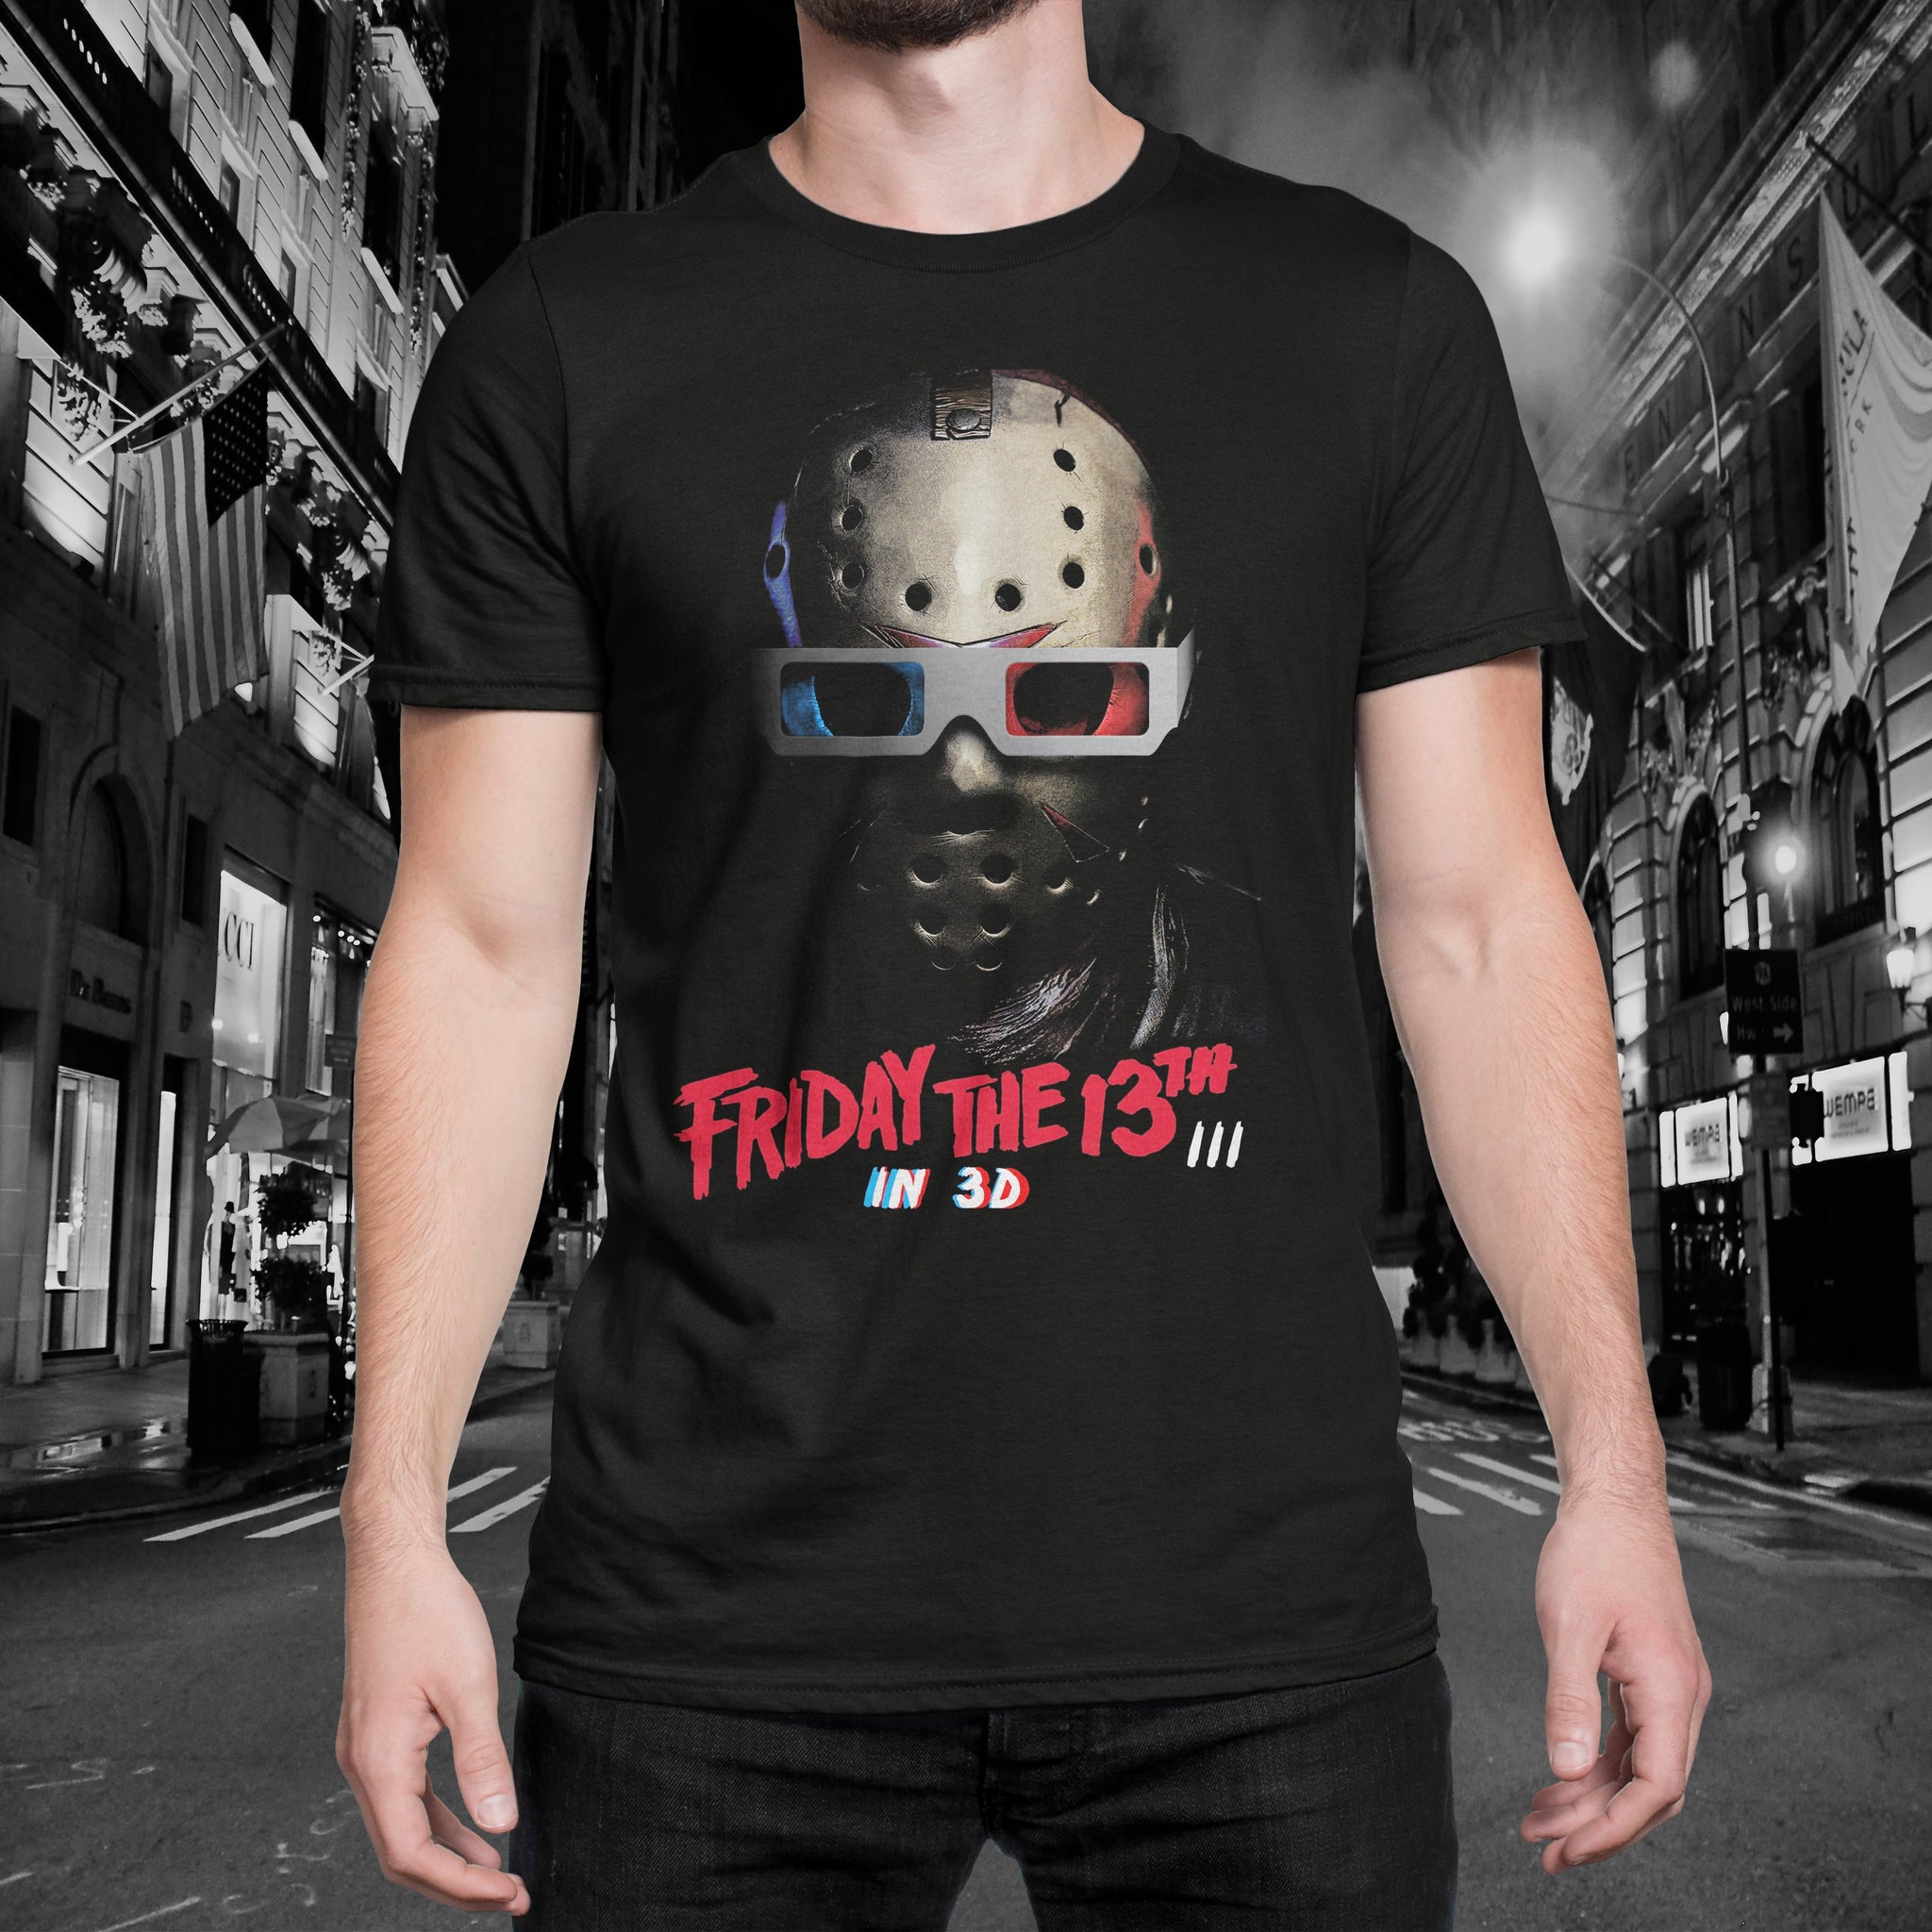 Friday the 13th III " In 3D" Tee